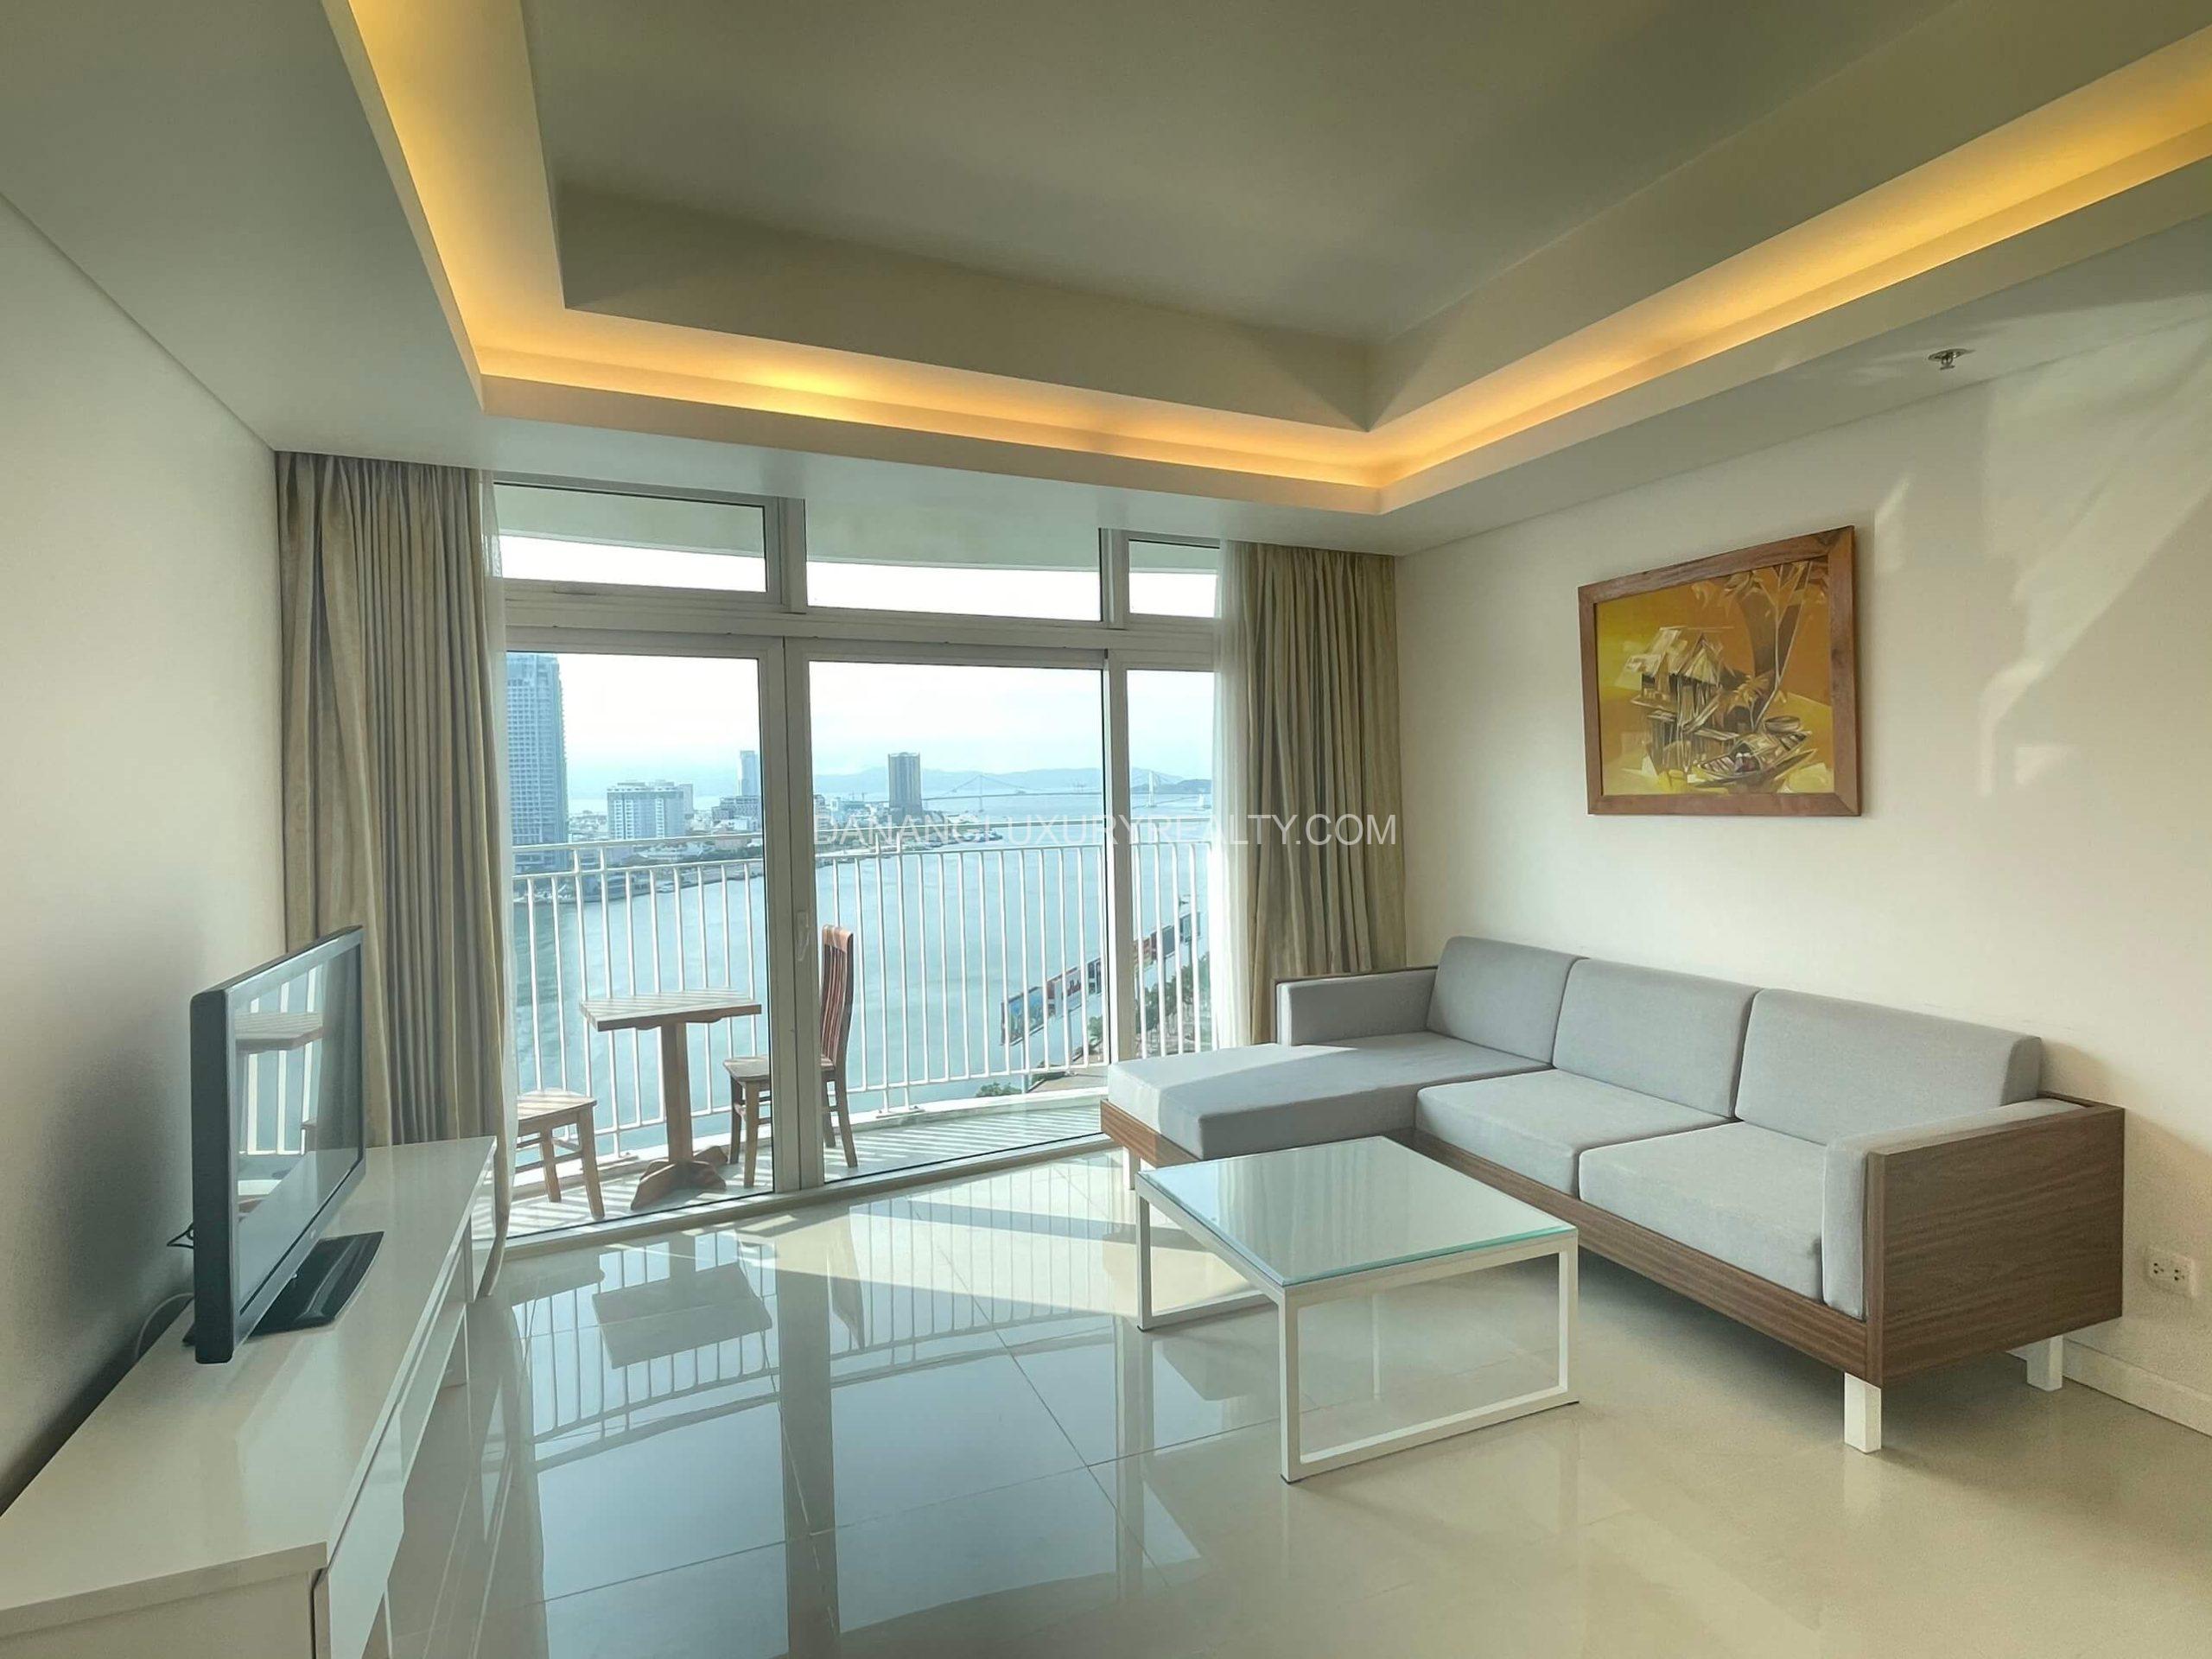 Azura Apartment 2BDR on High floor in Son Tra District